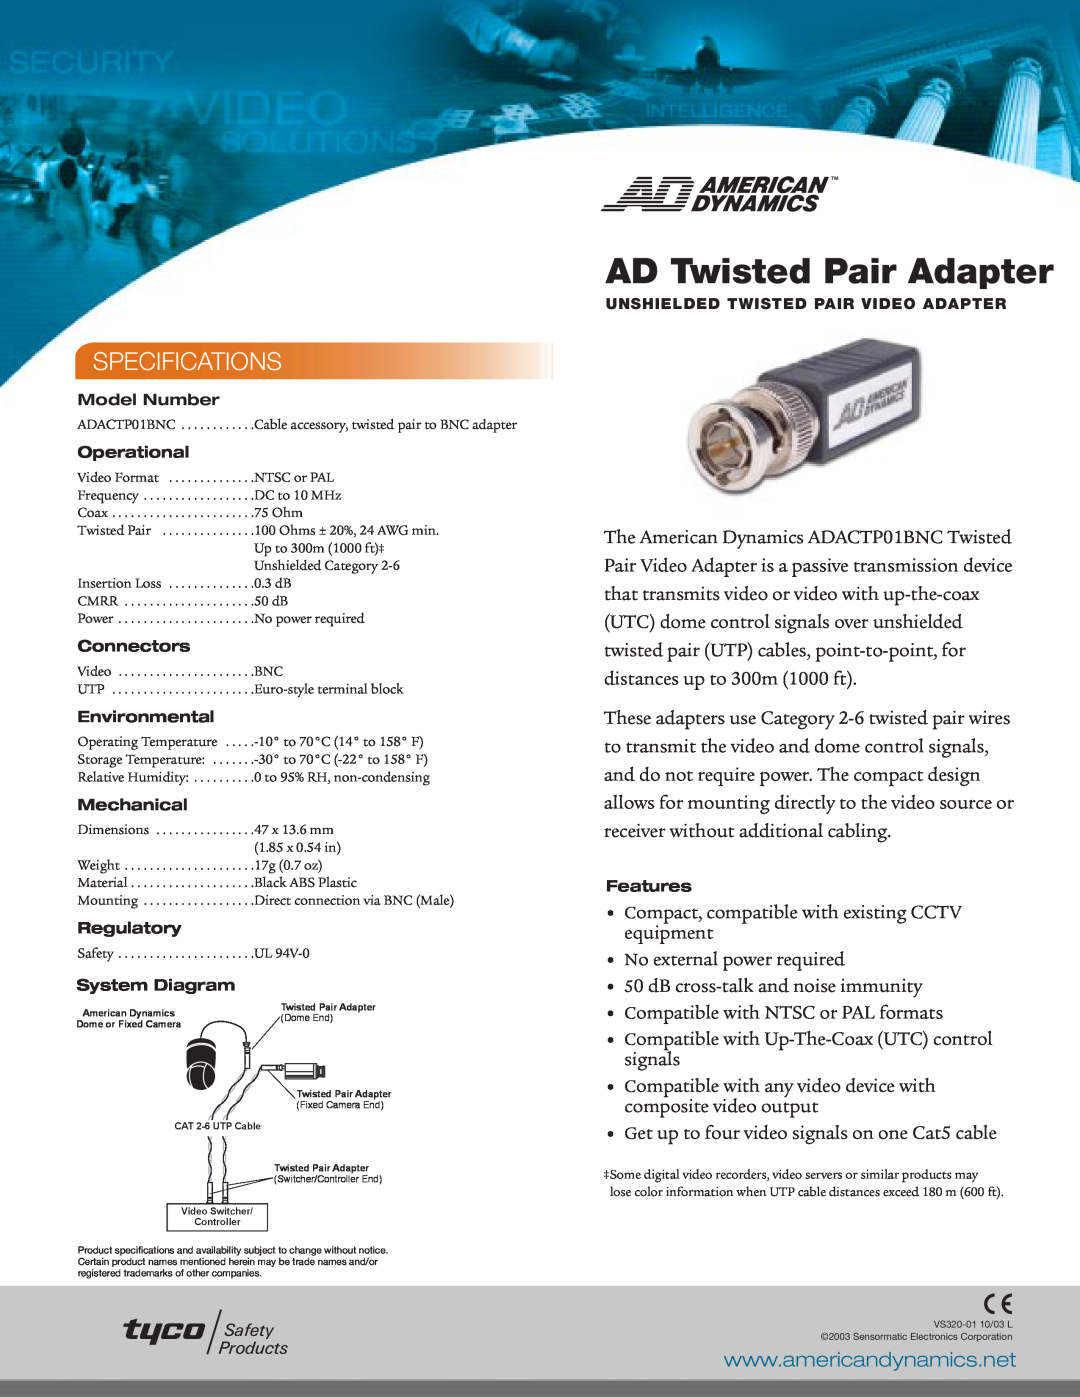 American Dynamics ADACTP01BNC specifications AD Twisted Pair Adapter, Specifications 